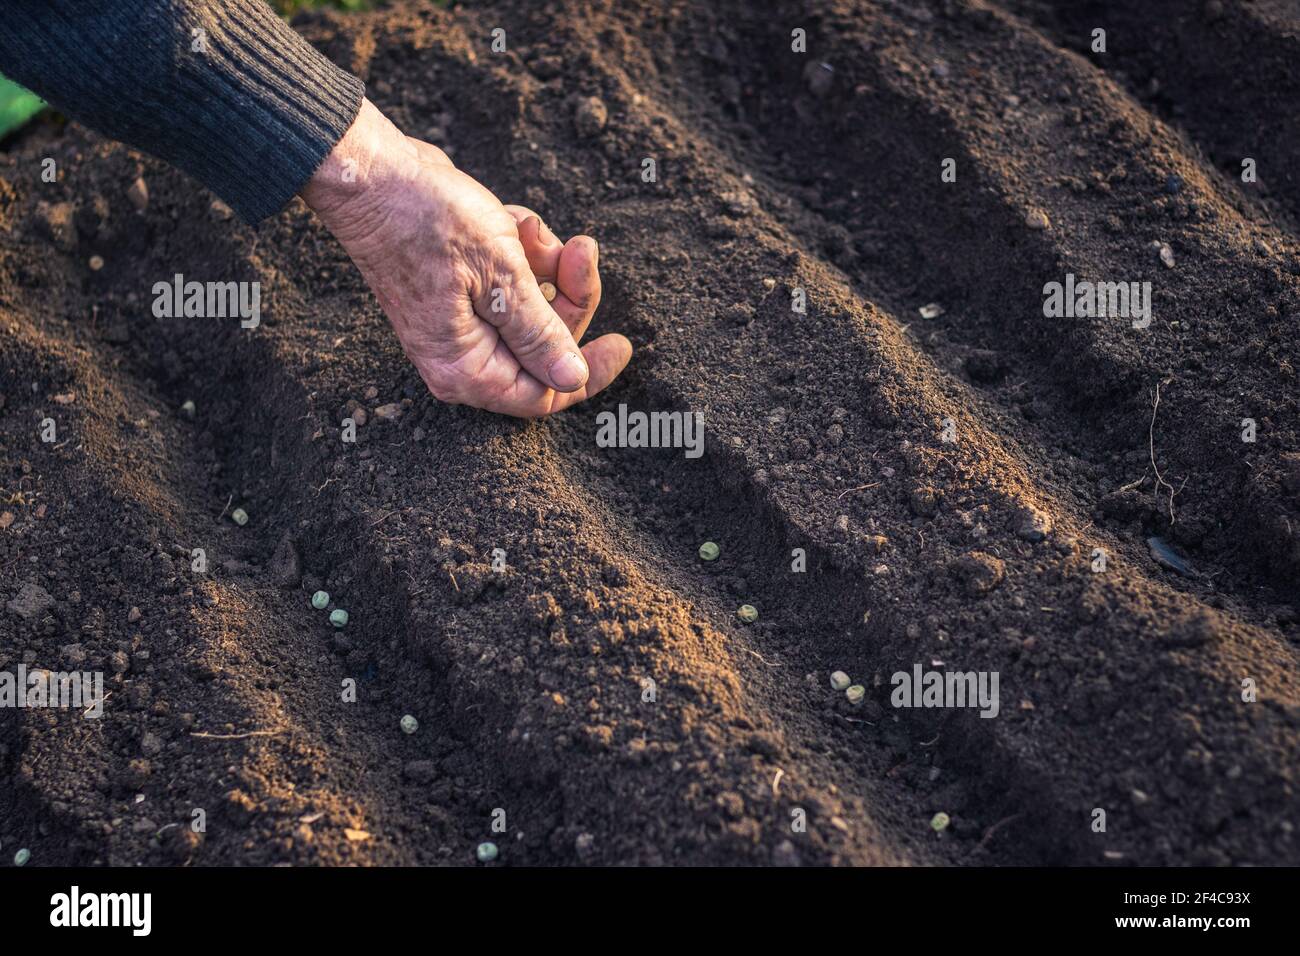 Gardener planting small seed in soil. Sowing at spring in garden Stock Photo